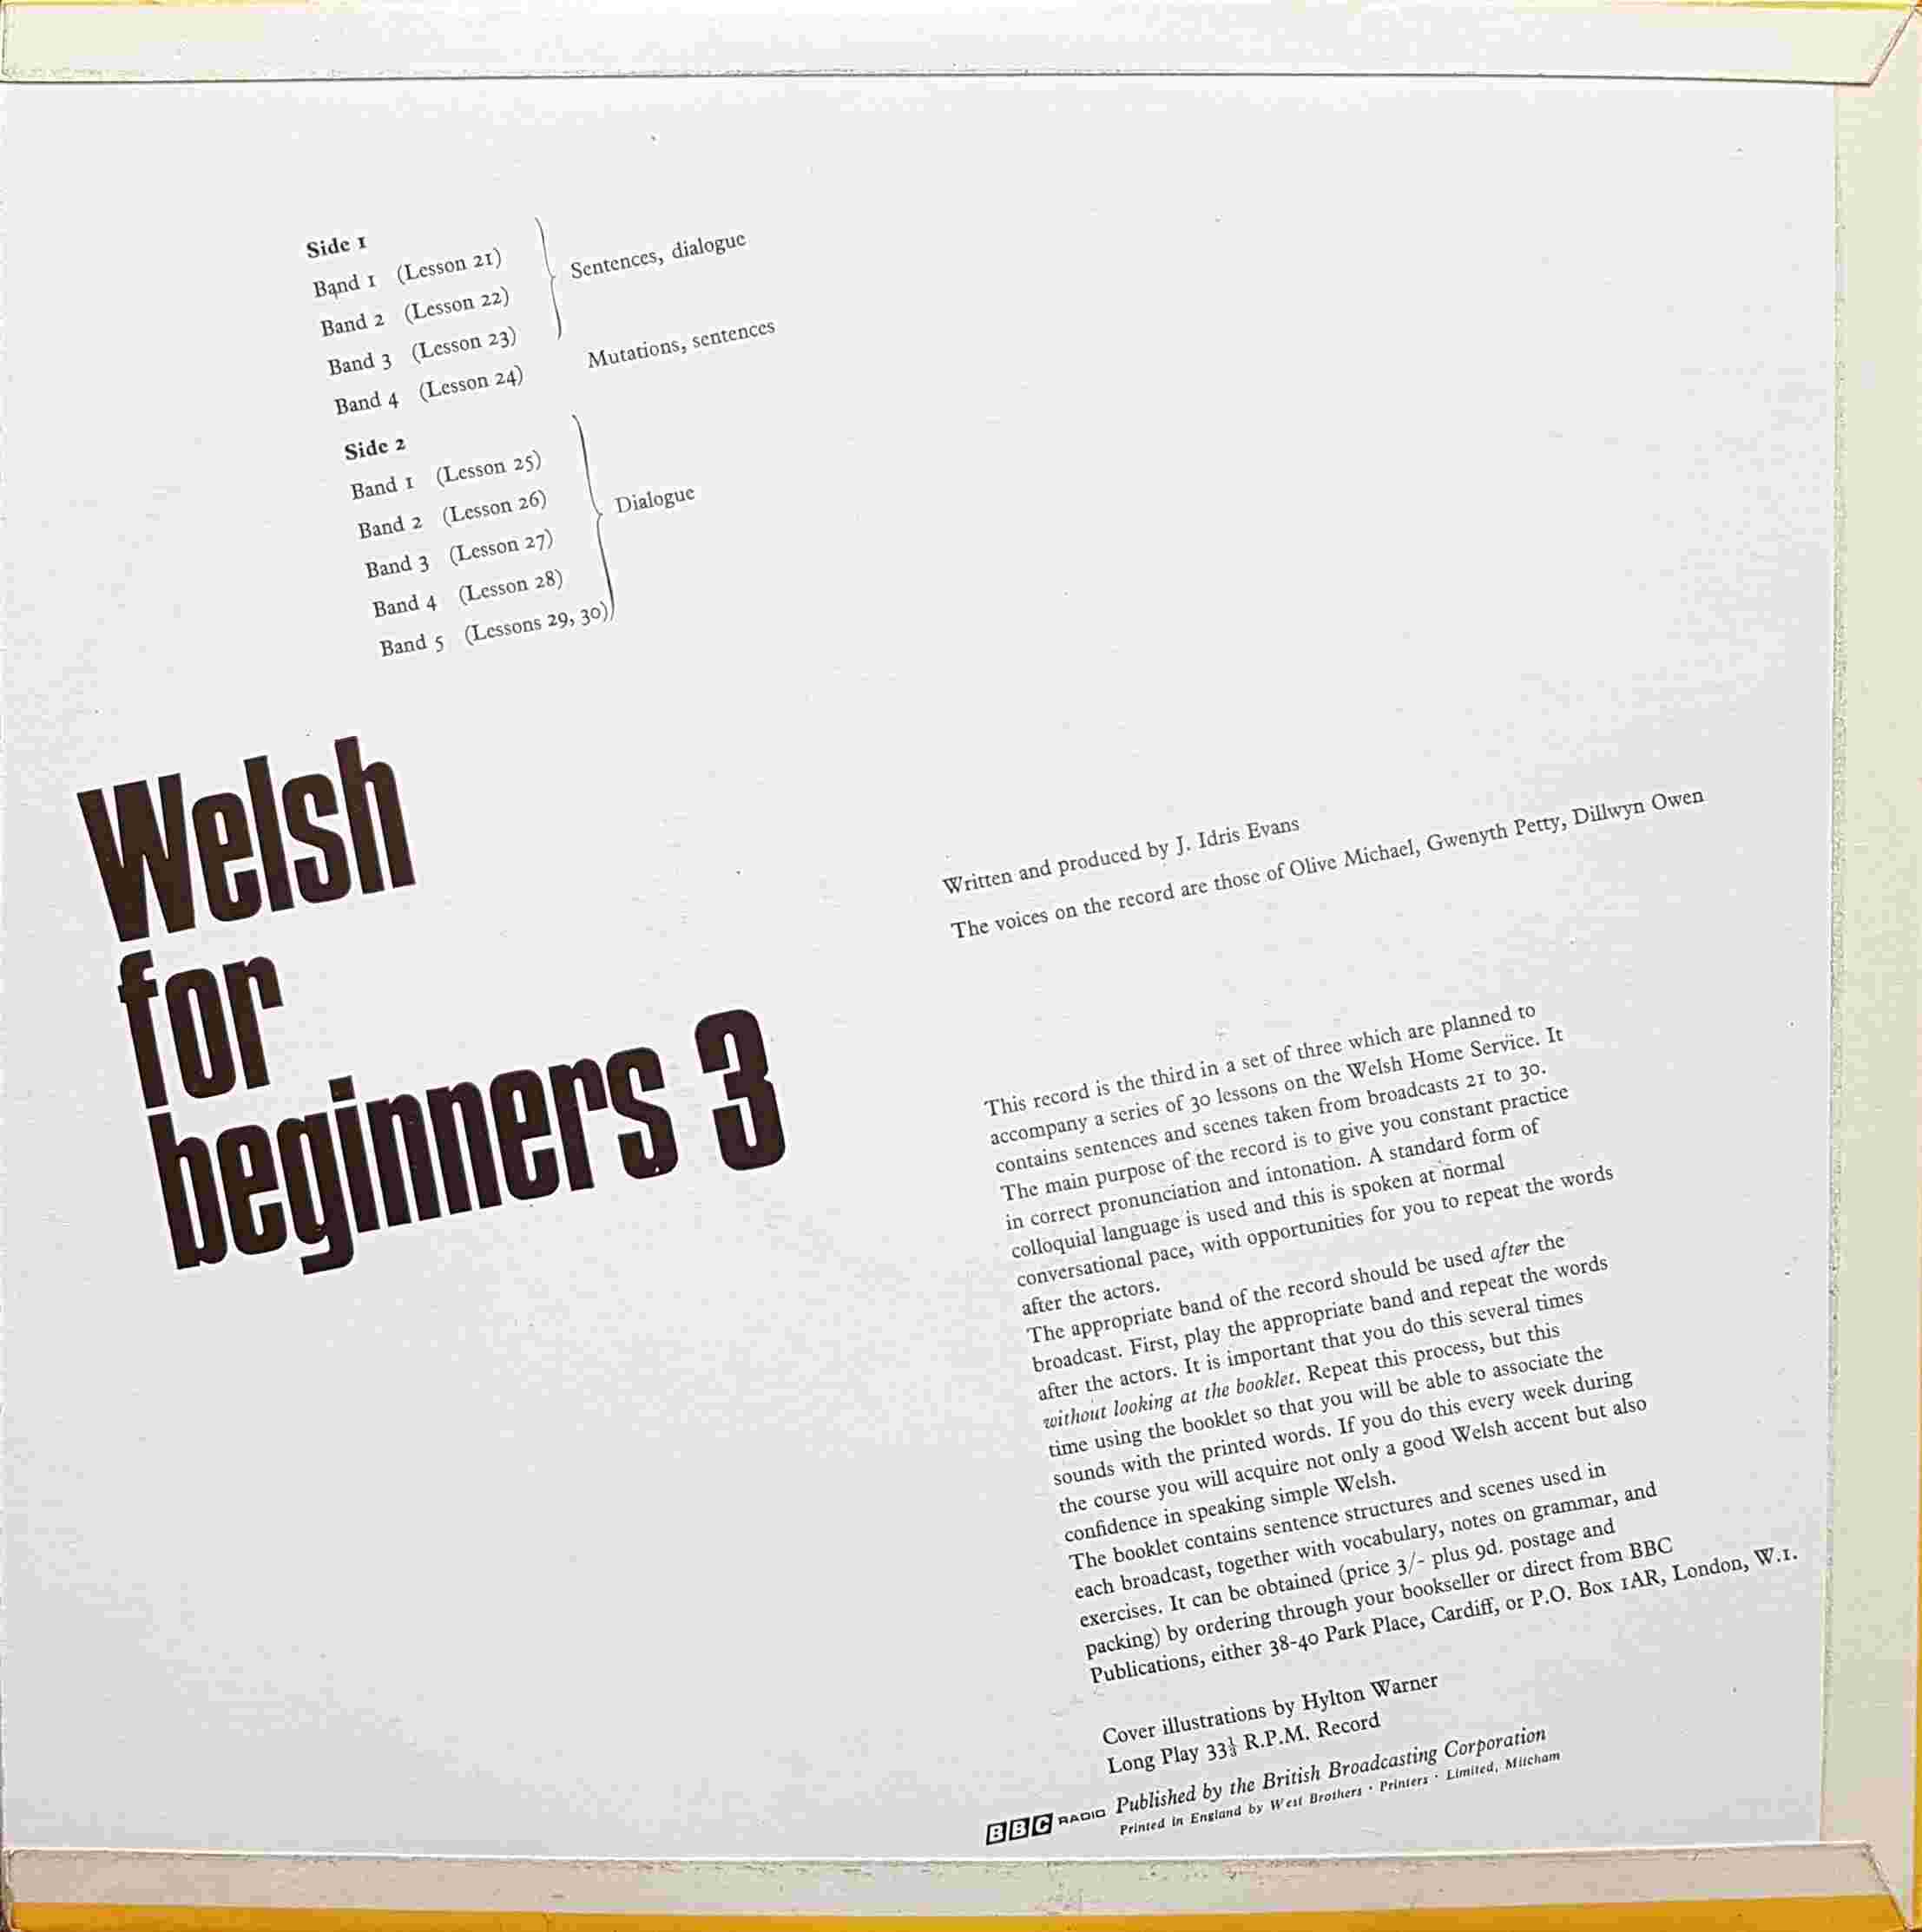 Picture of OP 105/106 Welsh for beginners - BBC radio course for beginners - Lessons 21 - 30 by artist J. Idres Evans from the BBC records and Tapes library